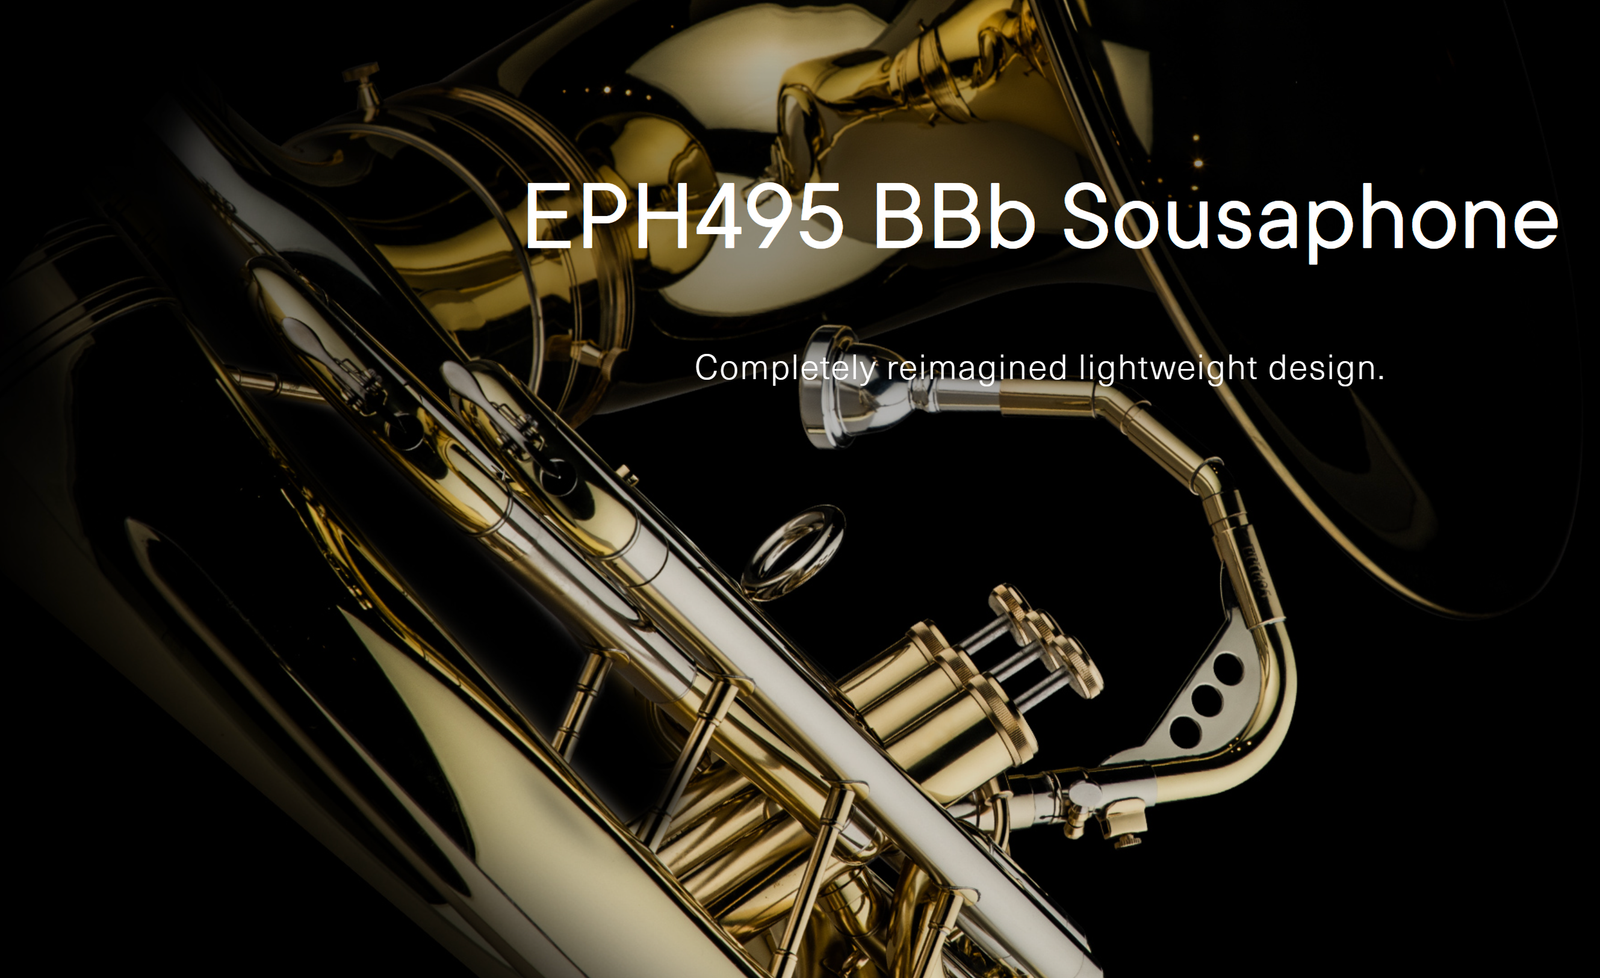 Reinforced marching sousaphone eph496